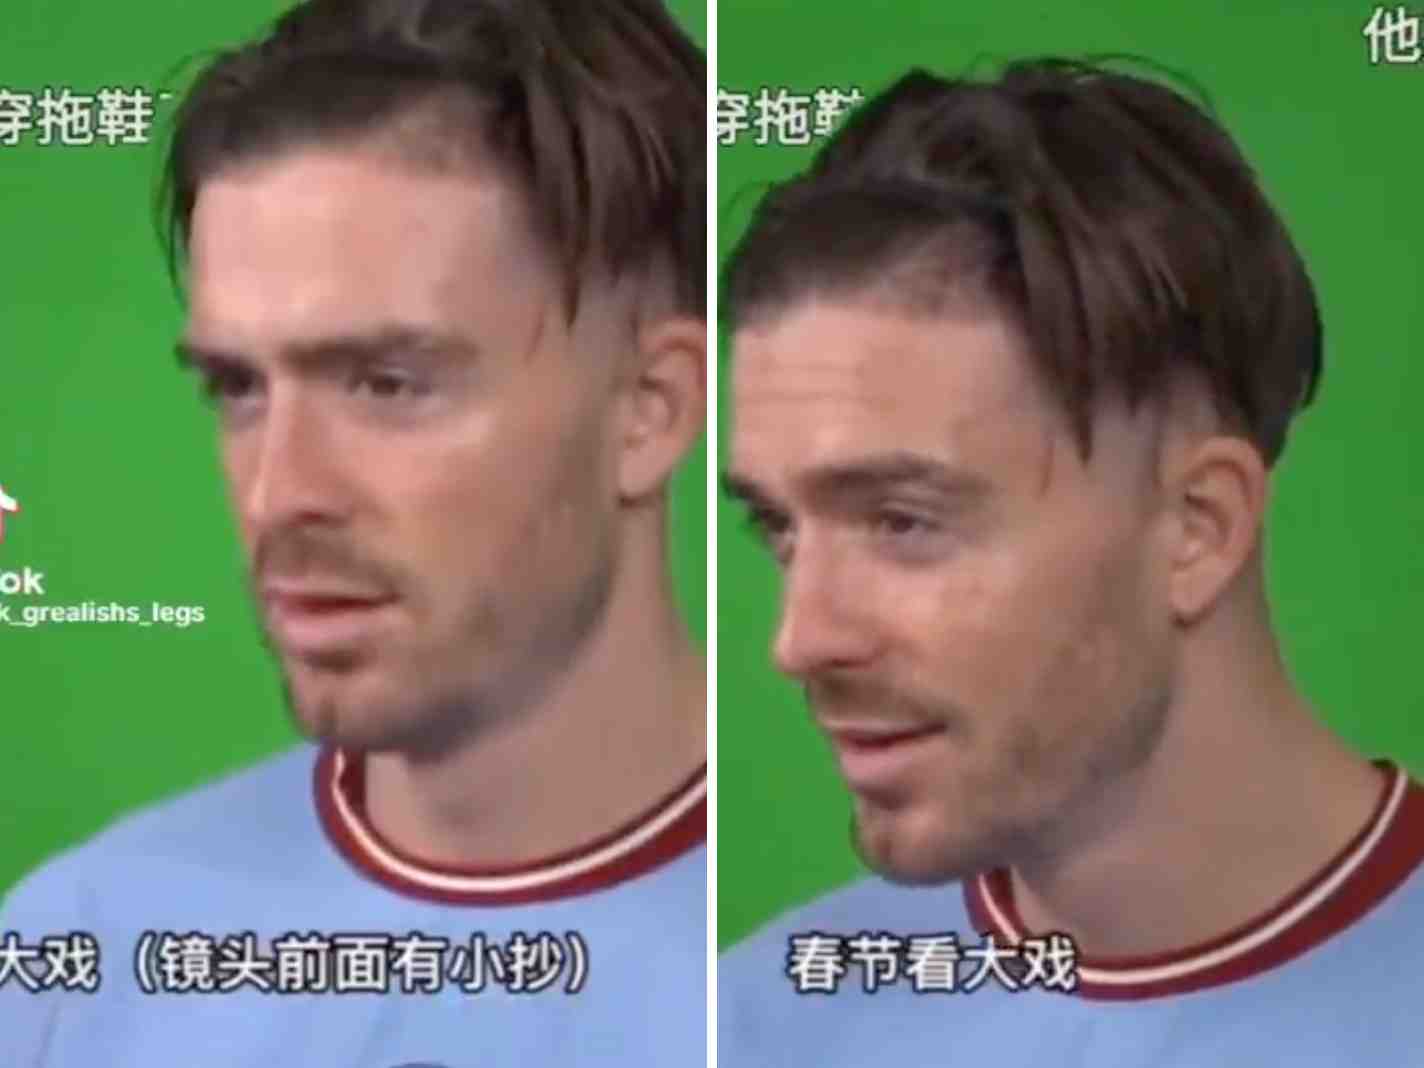 What Happens When Jack Grealish Tries to Speak Chinese? A Comical Disaster